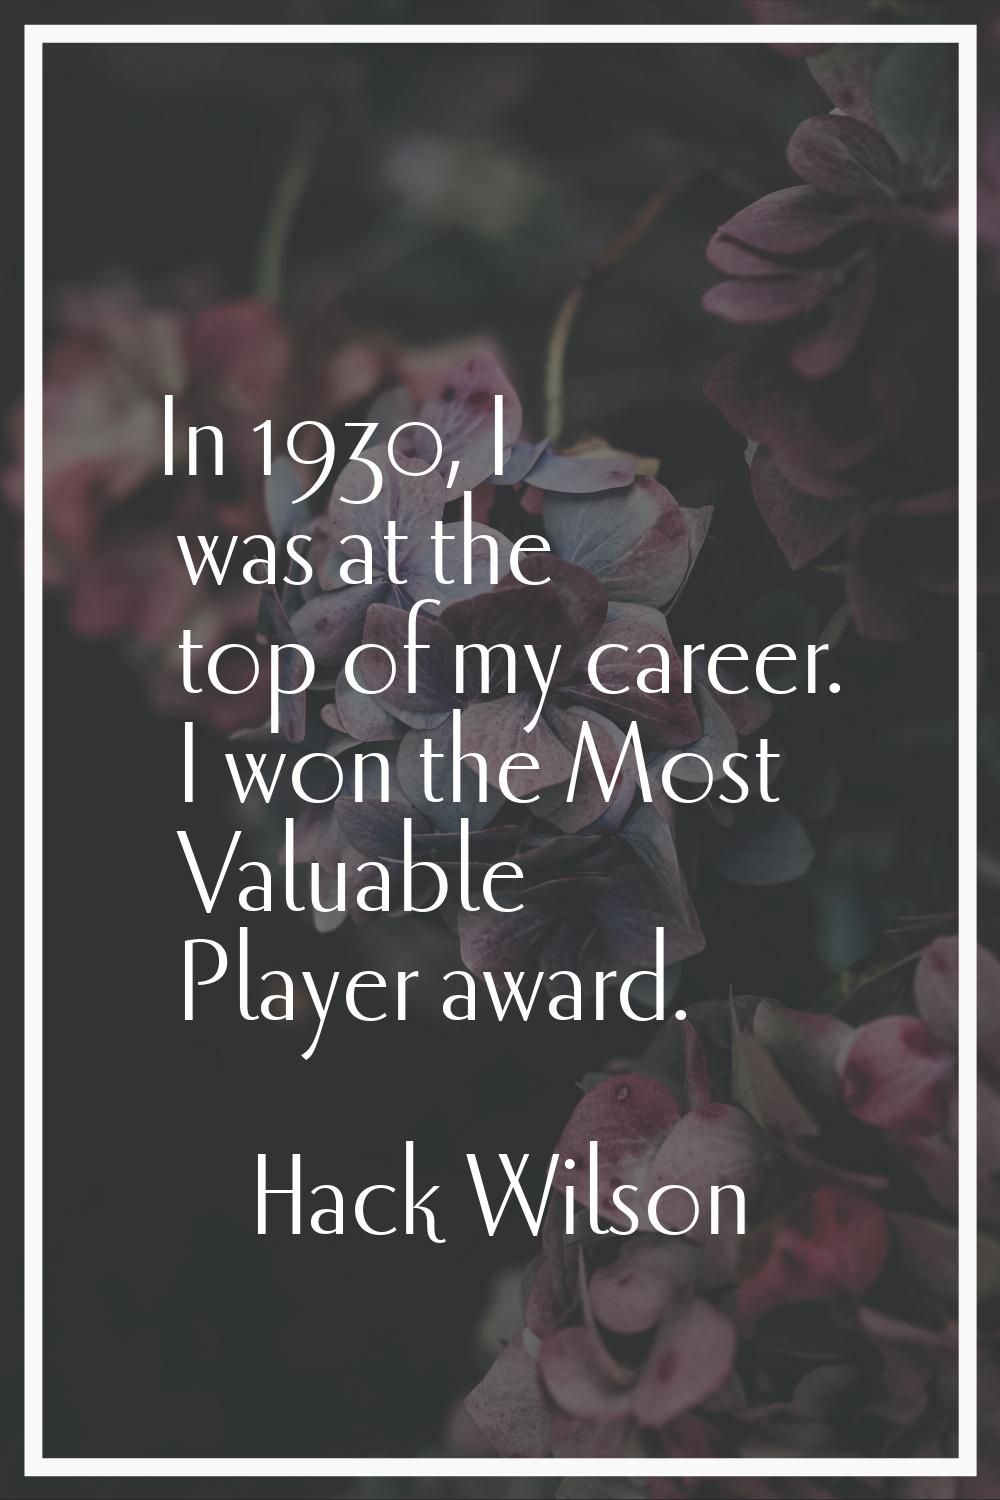 In 1930, I was at the top of my career. I won the Most Valuable Player award.